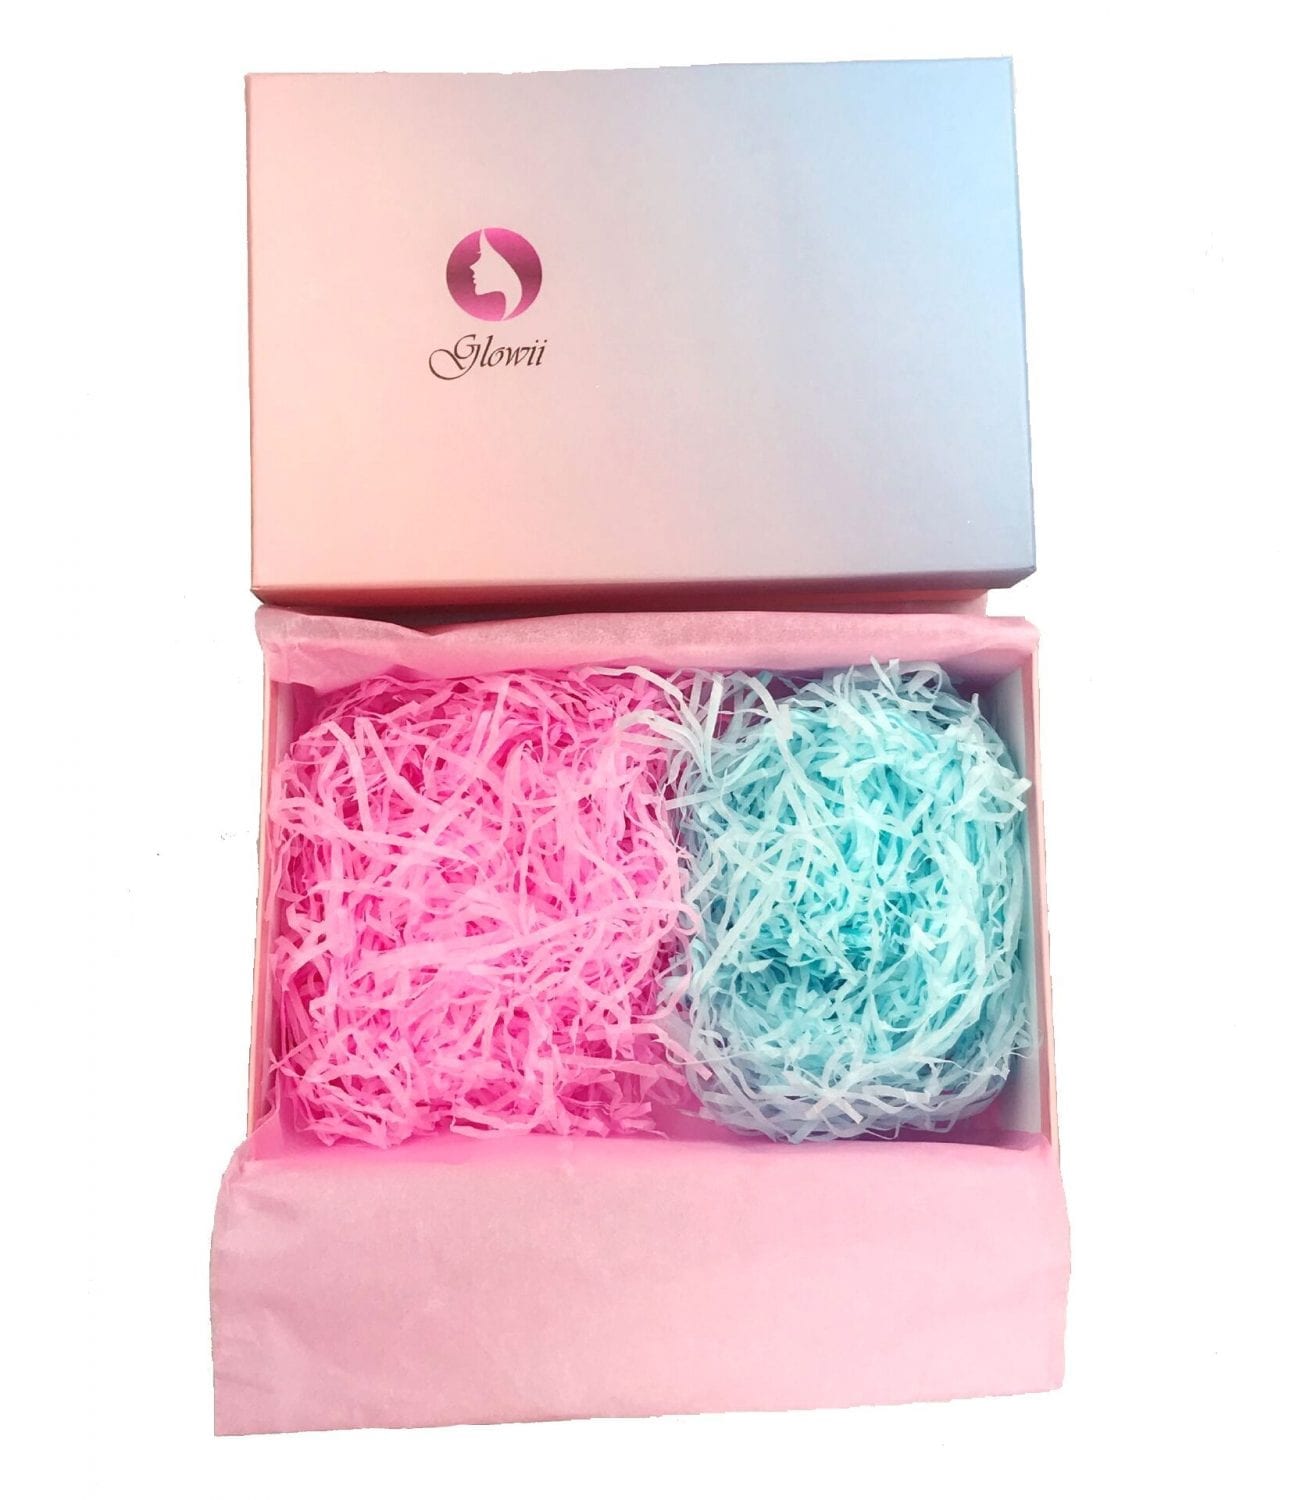 Glowii Gift Box with Shredded Tissue Paper – Large